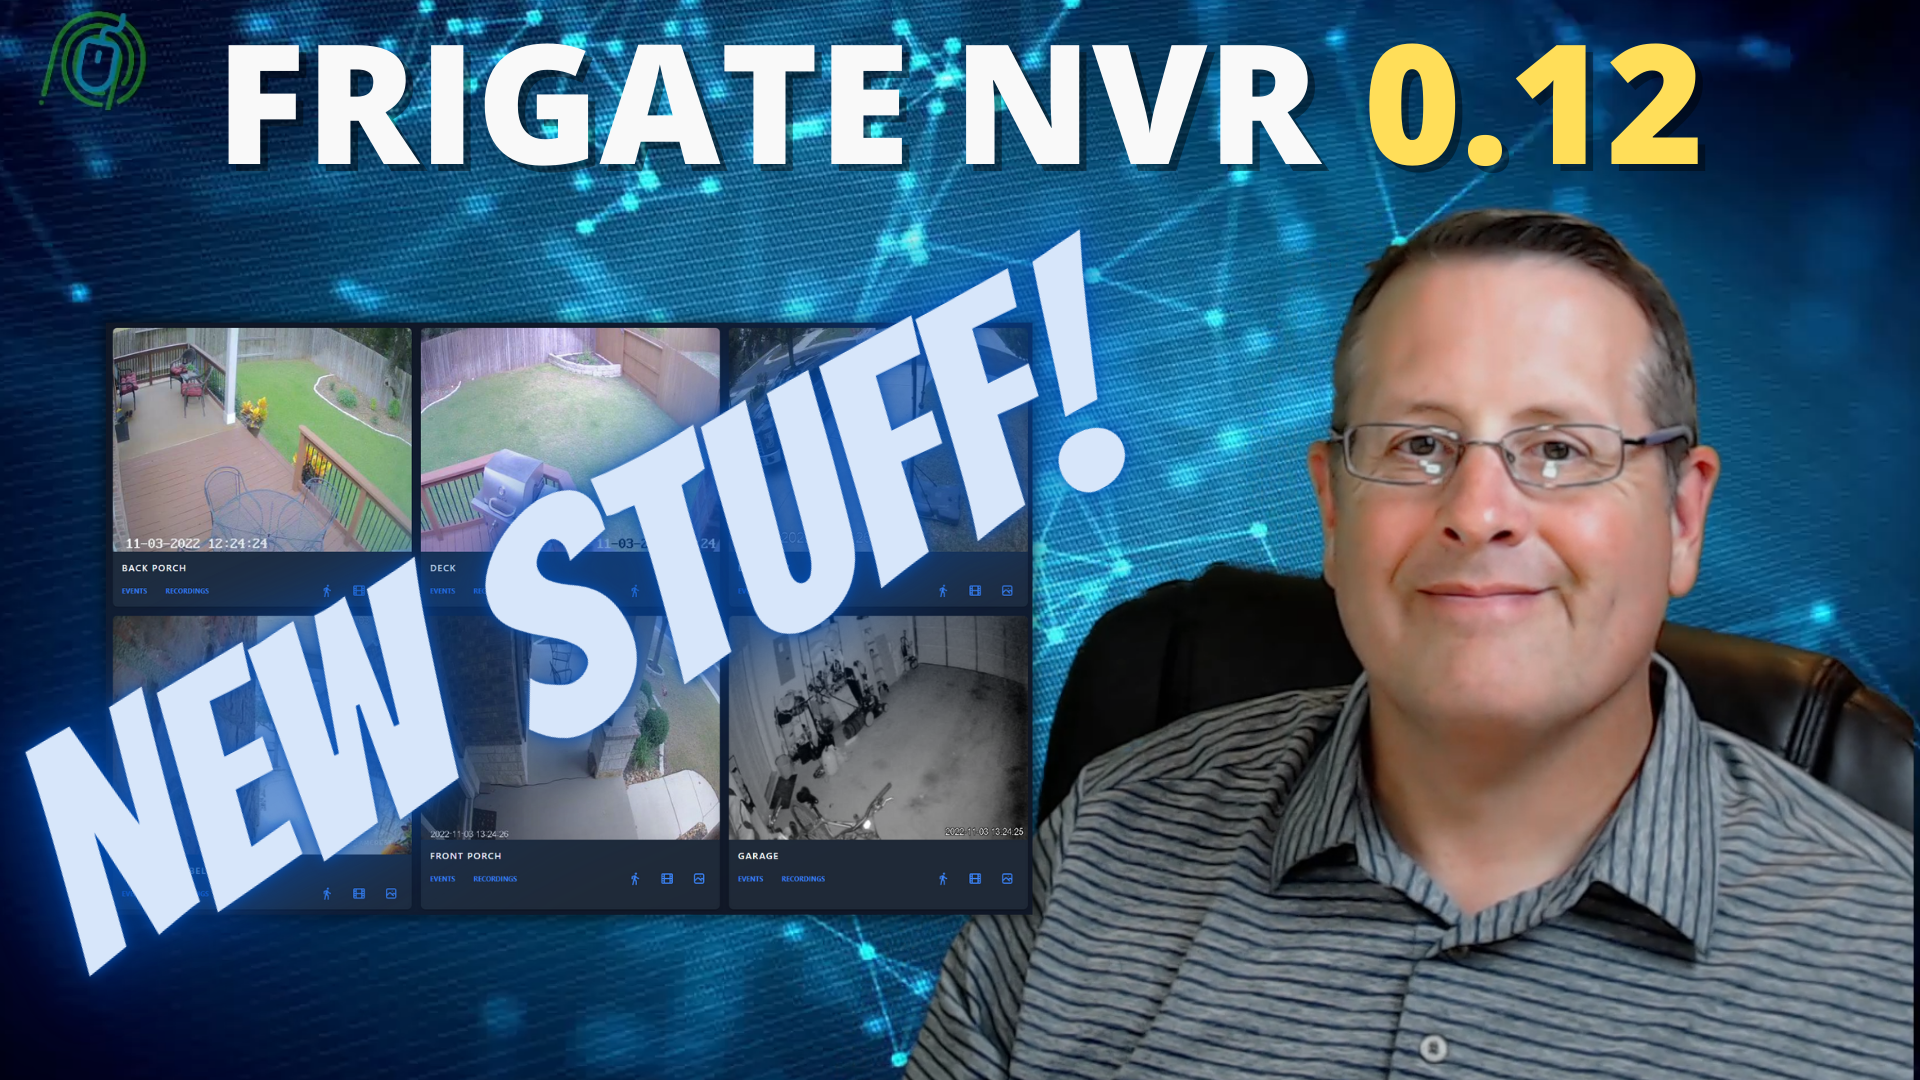 Frigate NVR Version 0.12. Now with go2rtc.